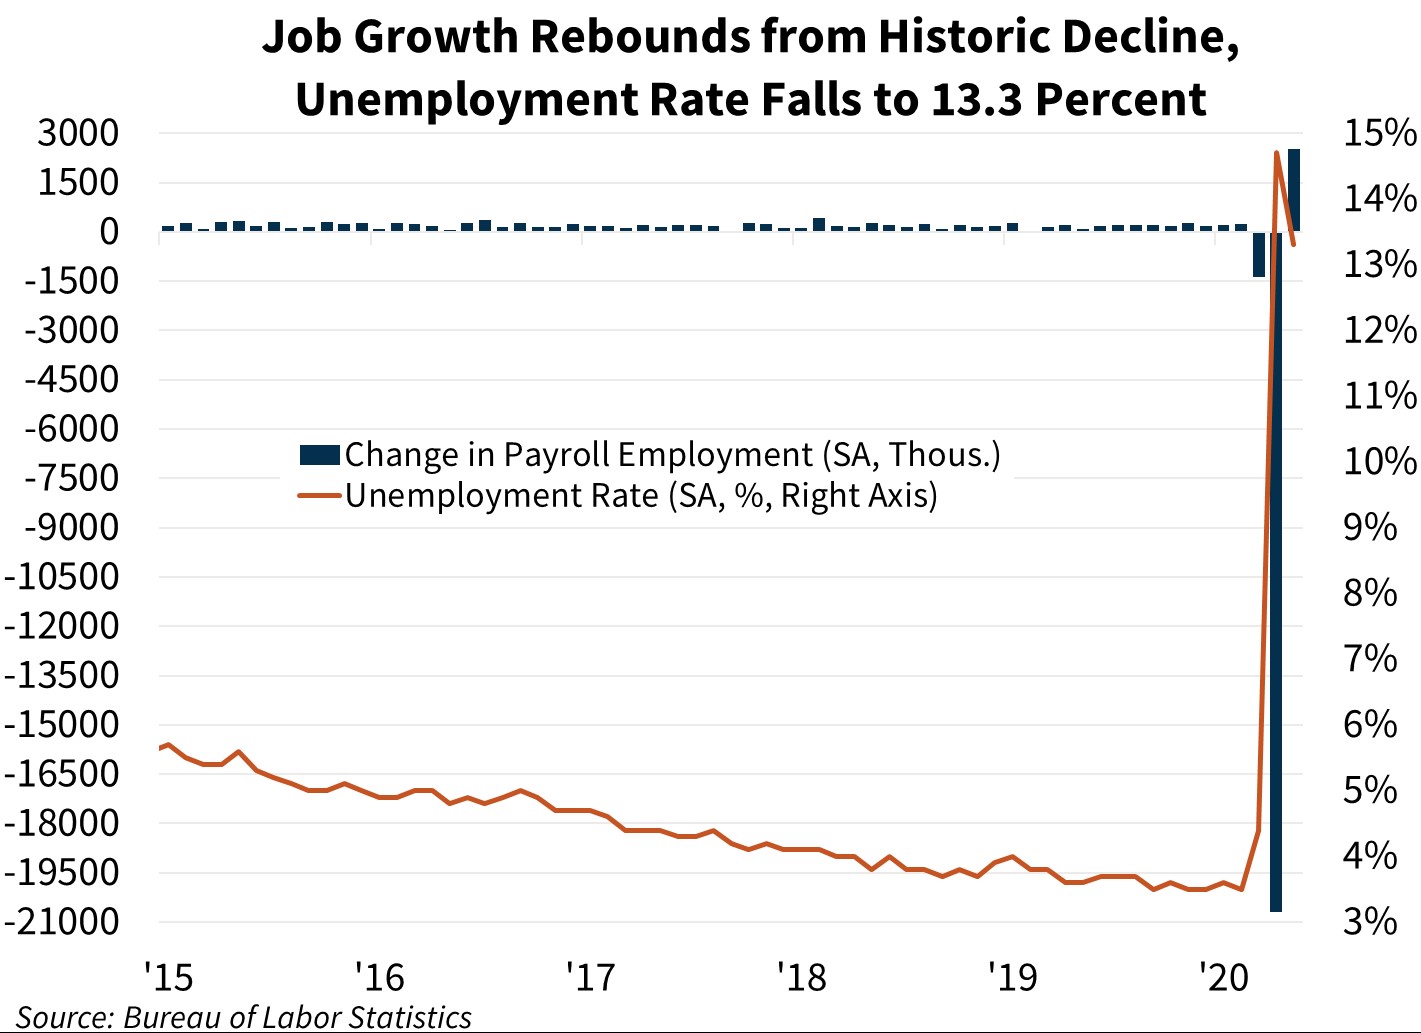 Job Growth Rebounds from Historic Decline, Unemployment Rate Falls to 13.3 Percent